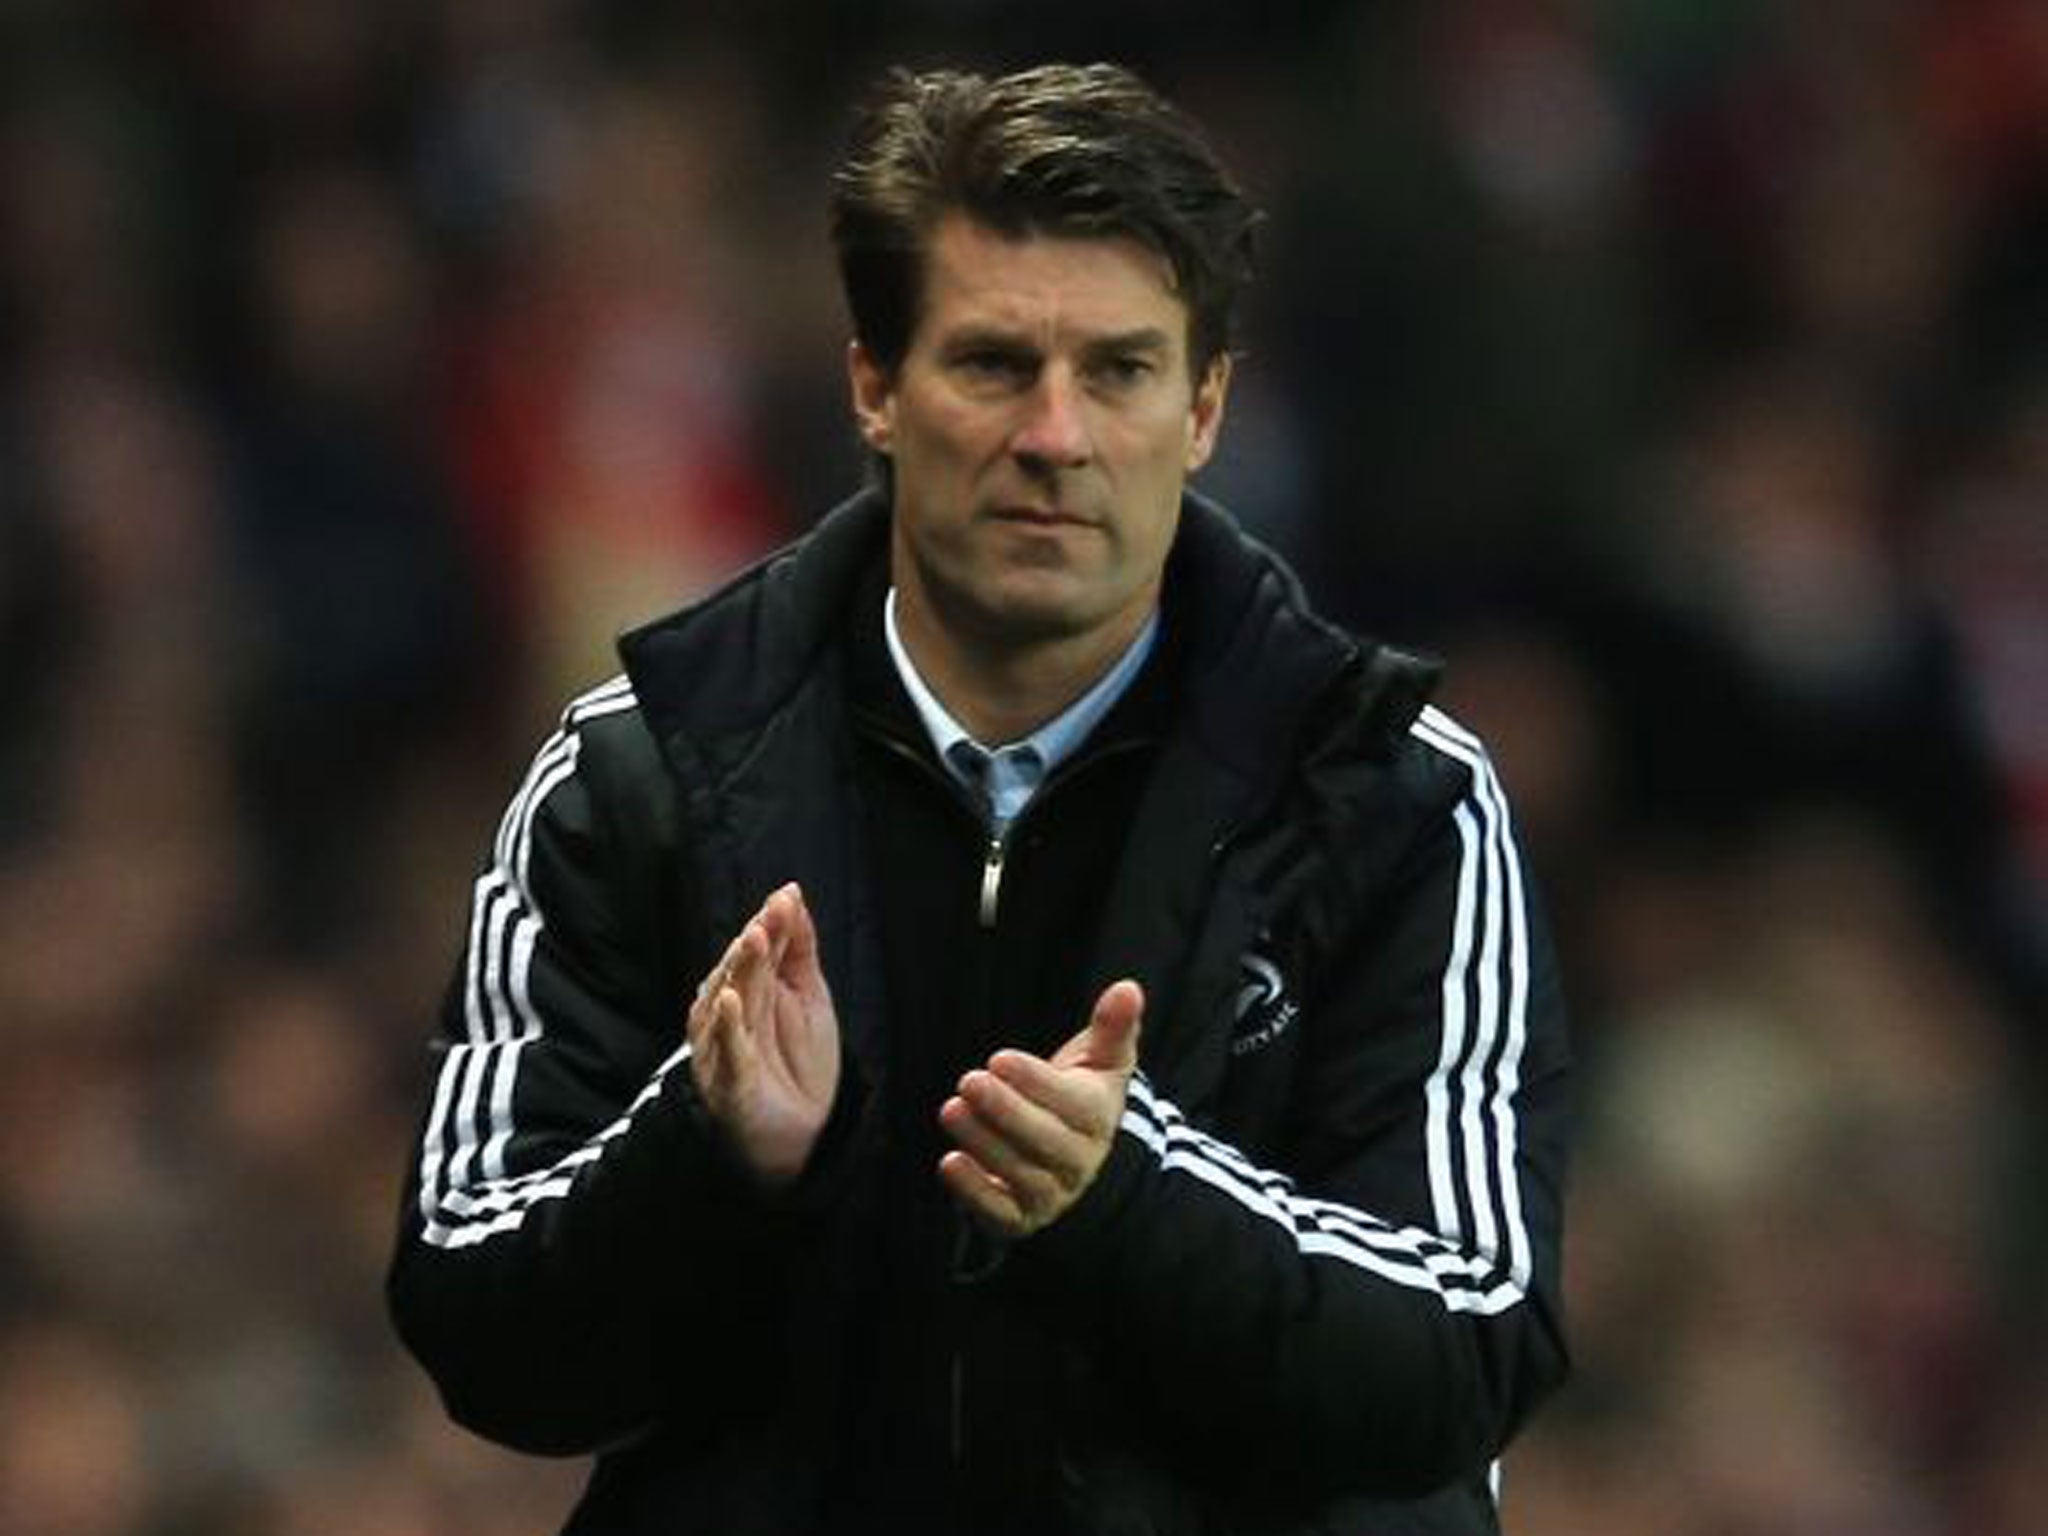 Laudrup's first season in south Wales was a resounding success after he led the Swans to the Capital One Cup